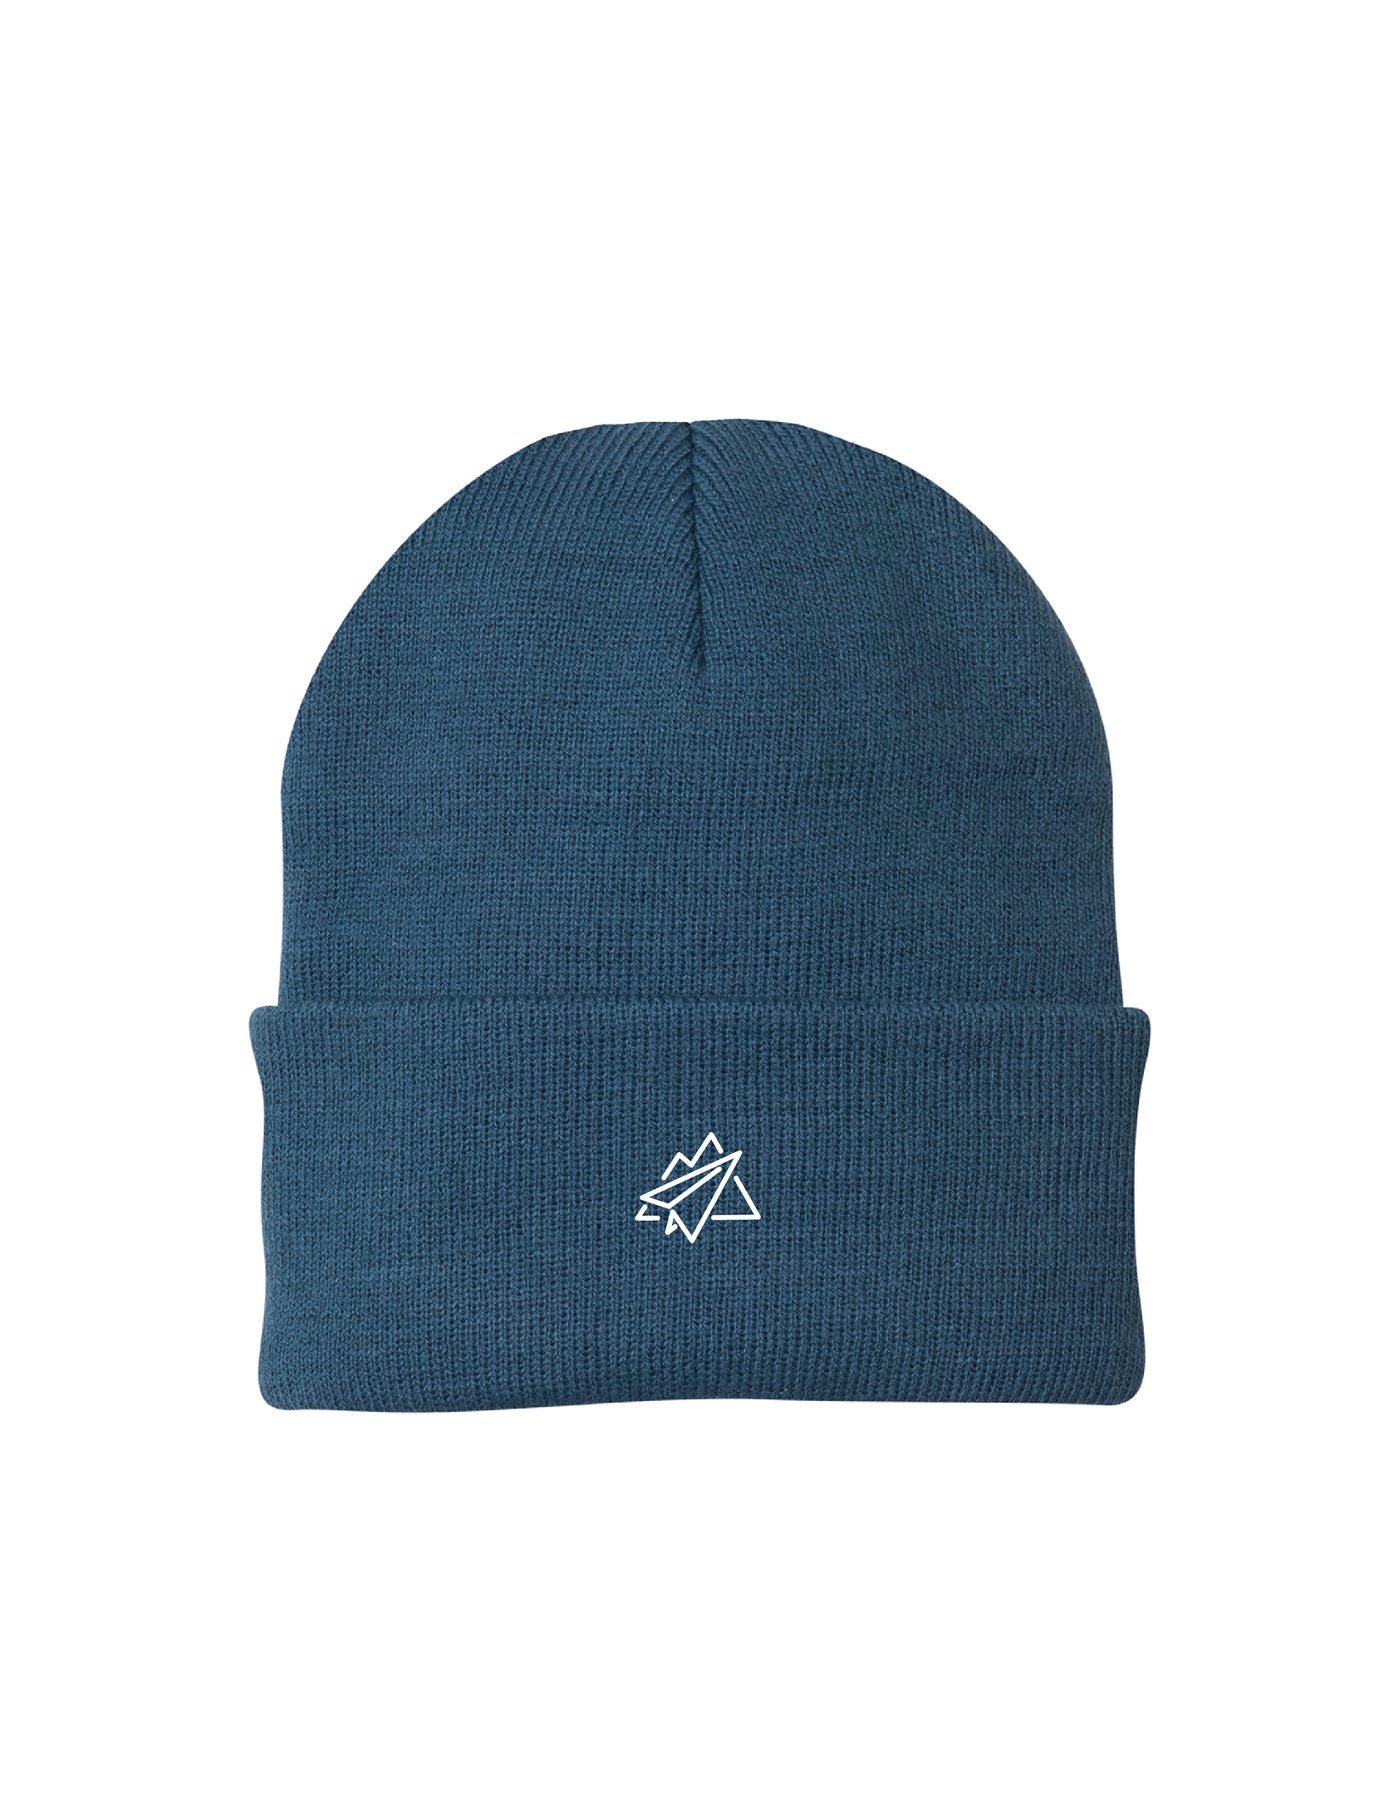 The Nomad Beanie - Blue